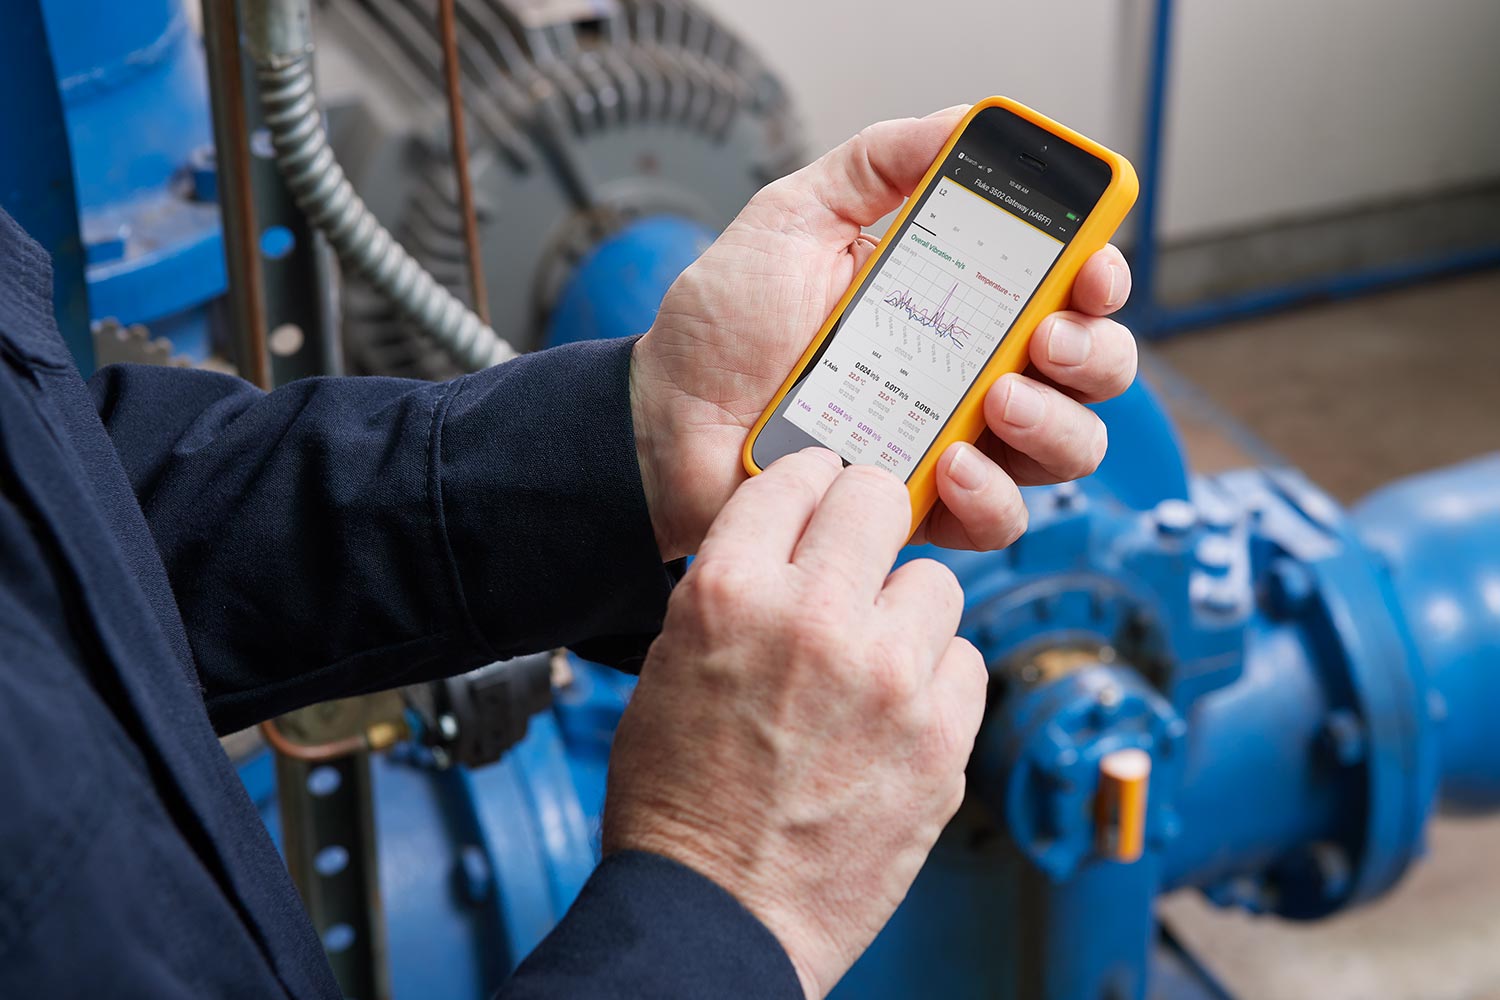 Personnel using the Fluke Connect app to check data from their smart device.